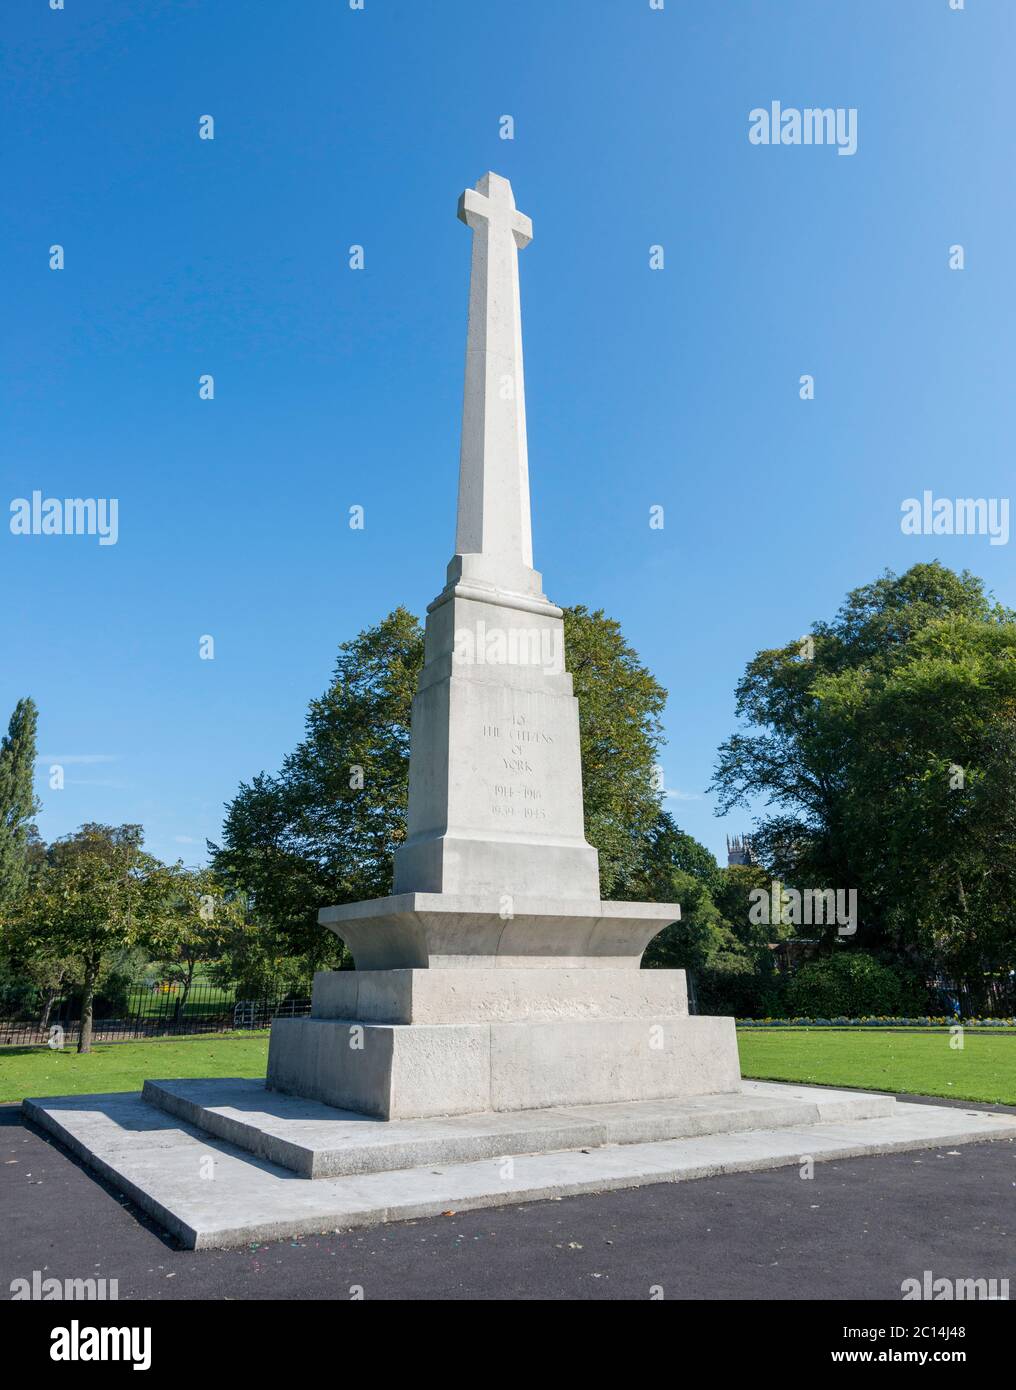 The simple white stone war memorial cross at Memorial Gardens in the centre of York, North Yorkshire Stock Photo